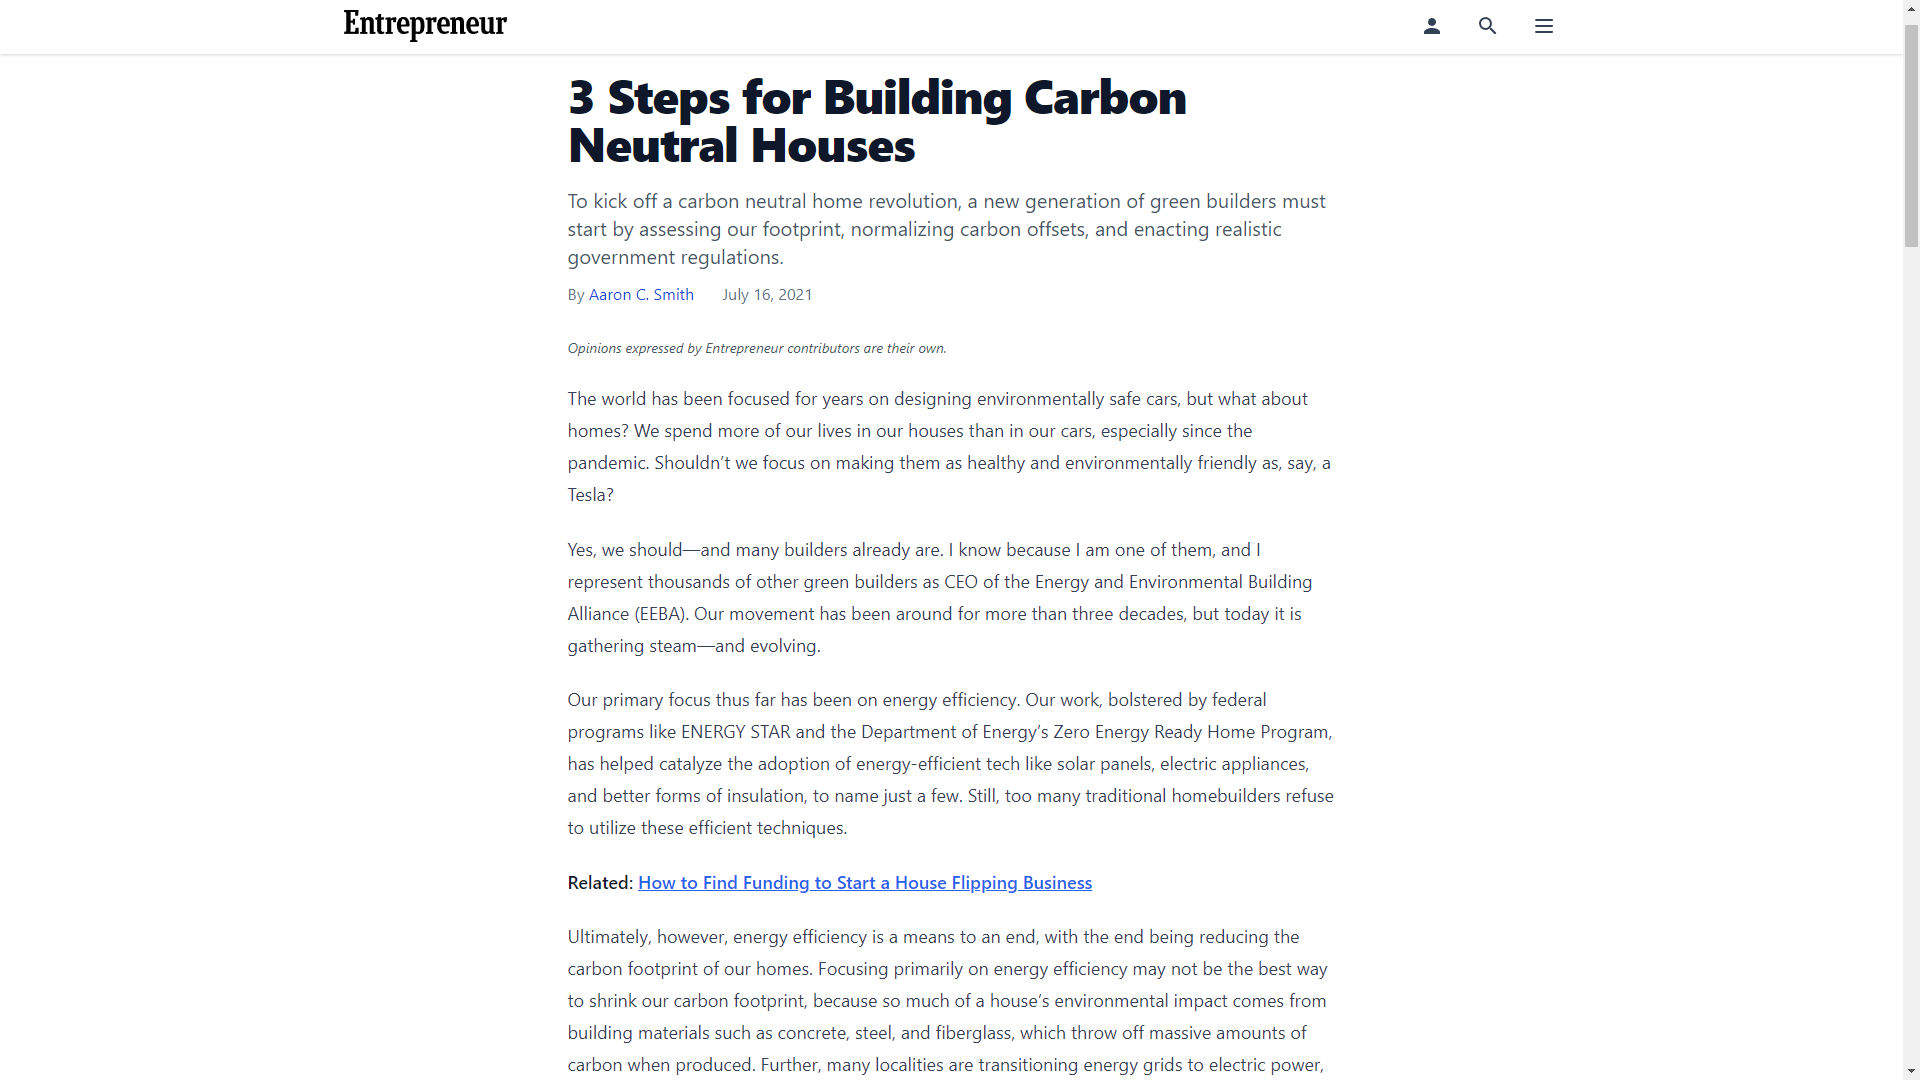 3 Steps for Building Carbon Neutral Houses